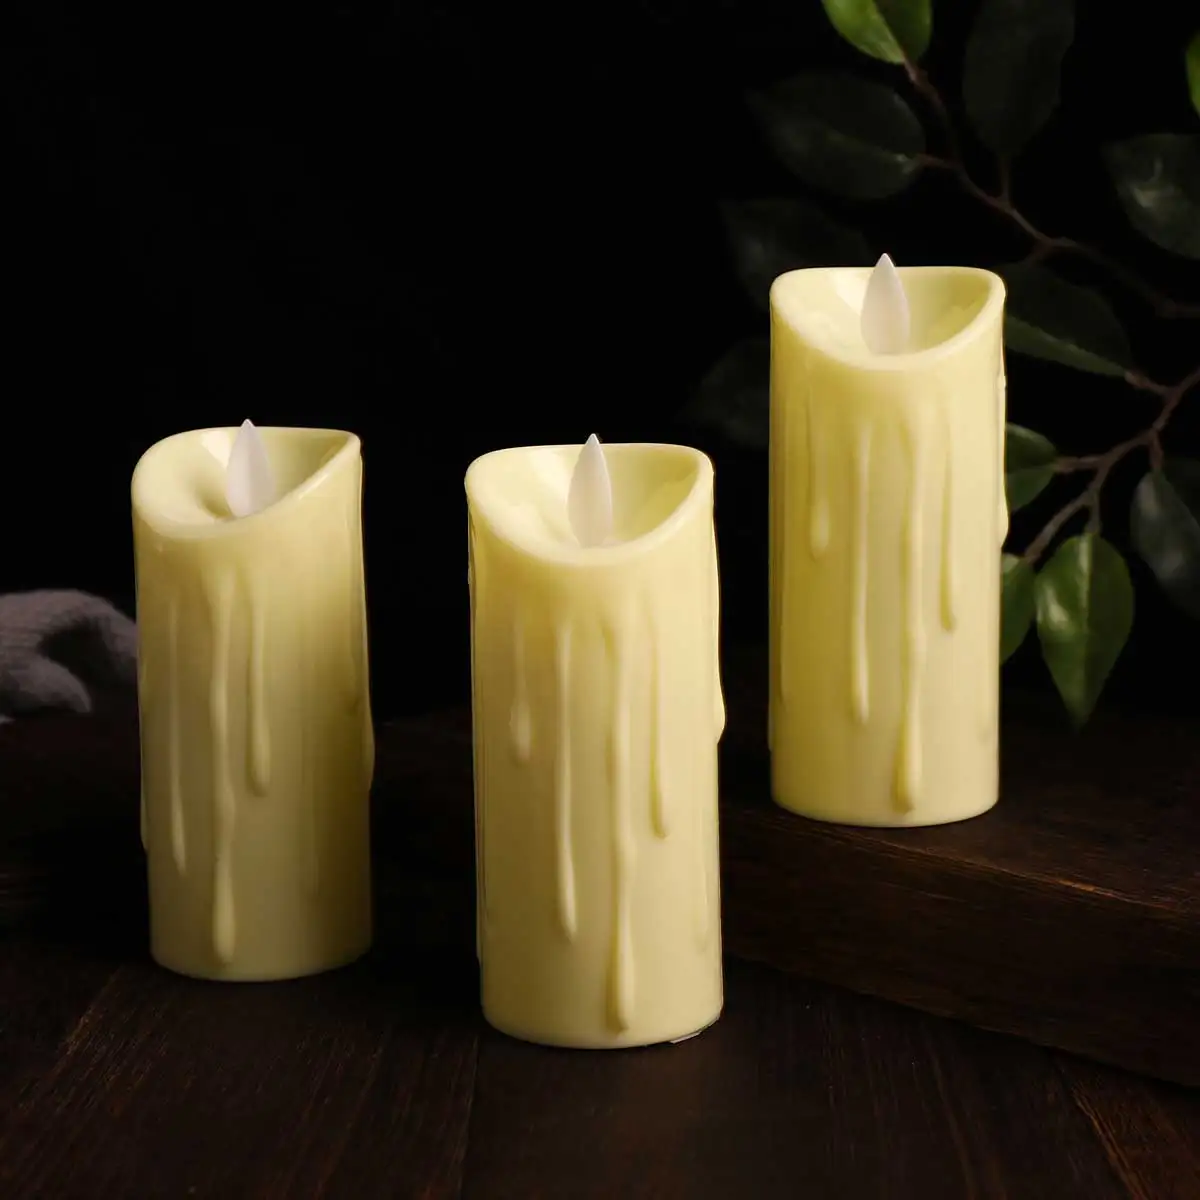 

Pack of 3/6 Battery Operated Flameless Flickering LED Candle Light,Electronic Moving Wick Pillar Candles For Wedding